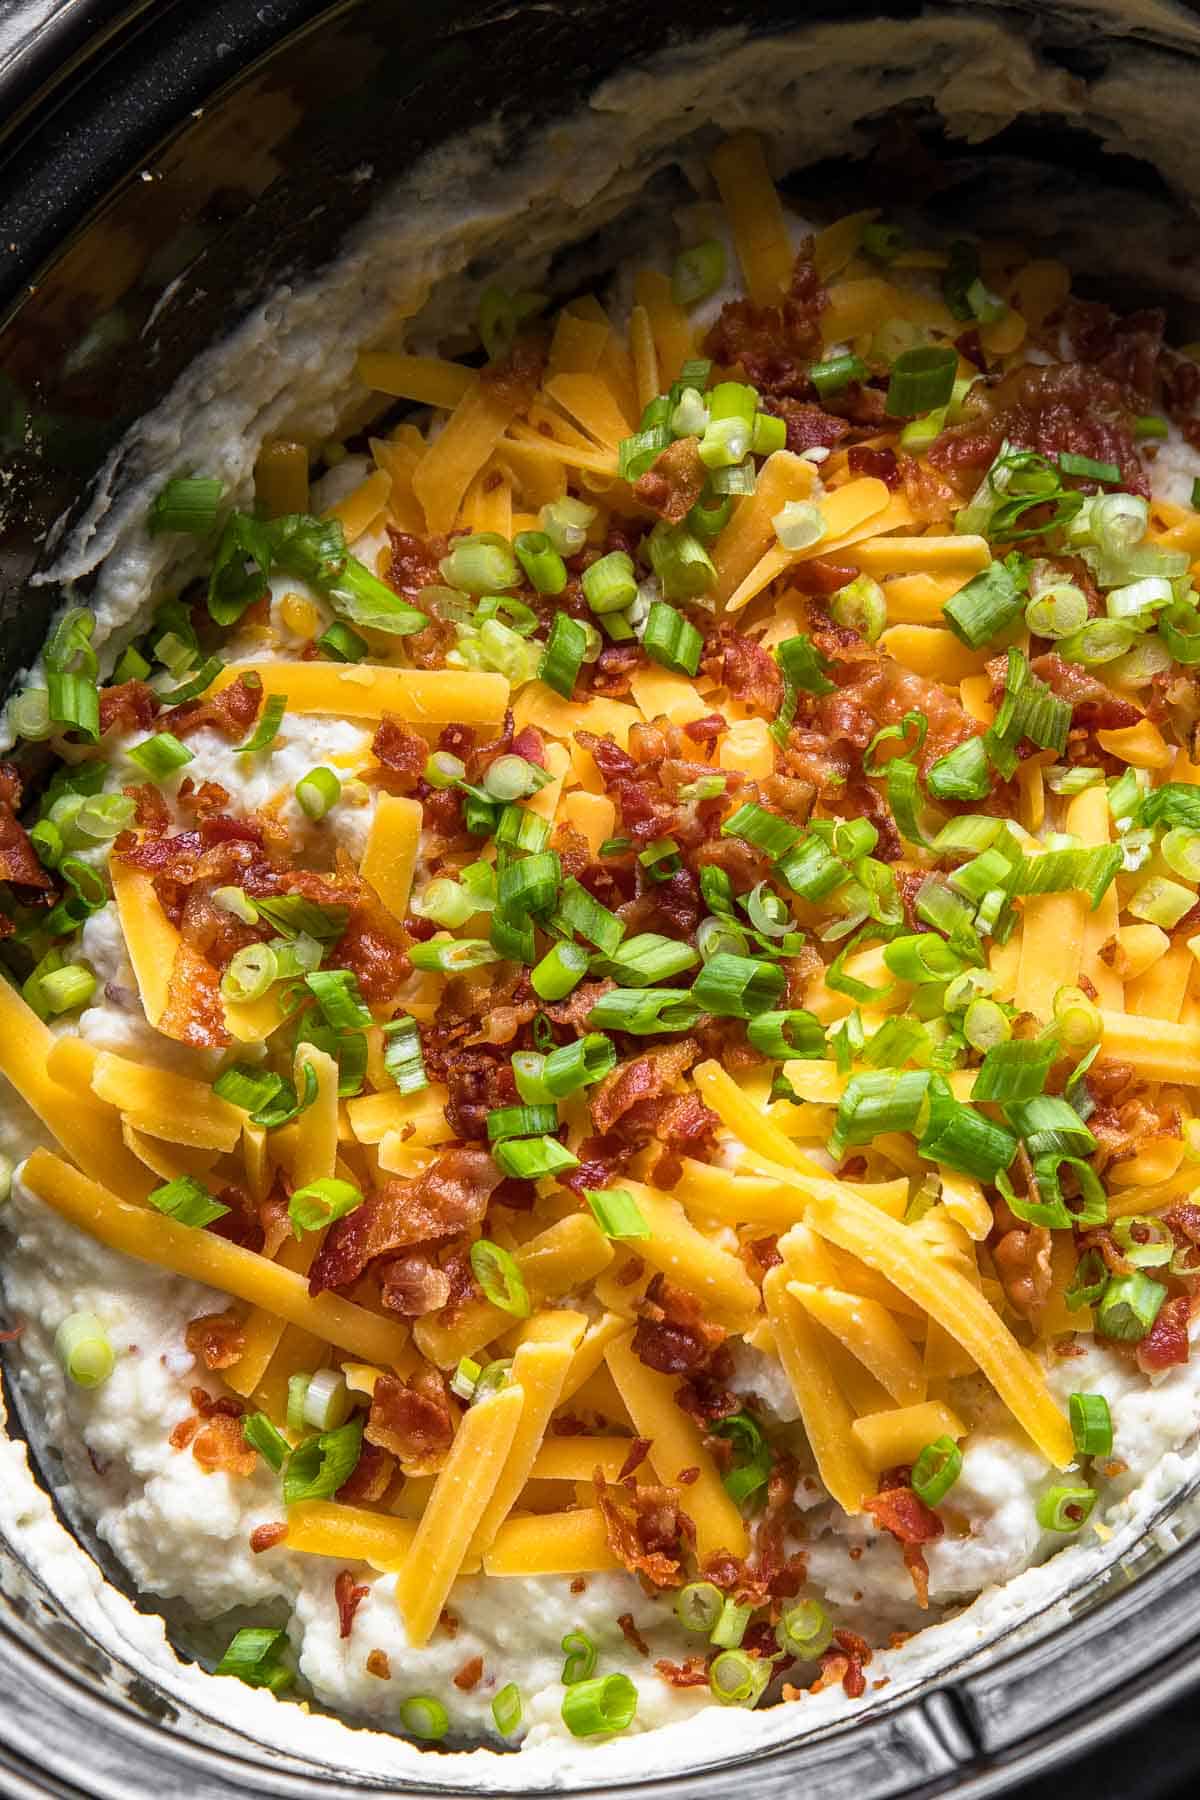 mashed potatoes in a crockpot loaded with shredded cheese, chopped bacon and green onions